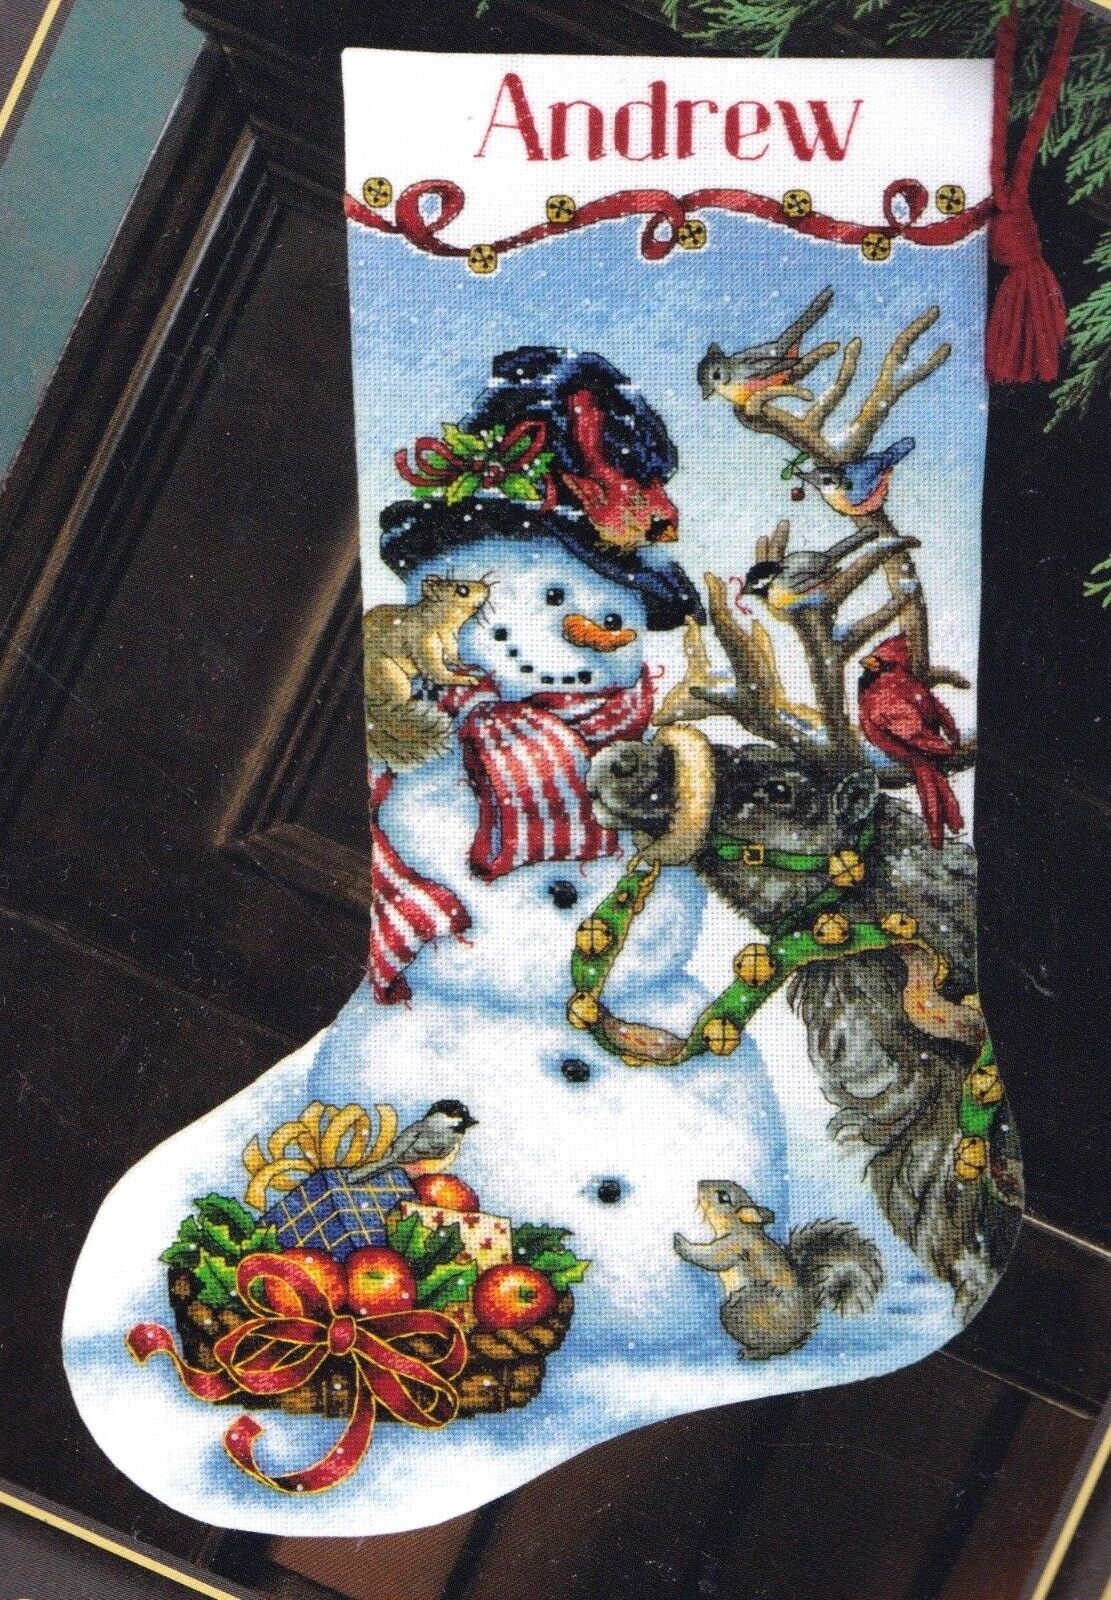 Counted cross stitch christmas stocking kit. Design features a  snowman with all of his woodland friends. animals and fruit gift basket in the background.